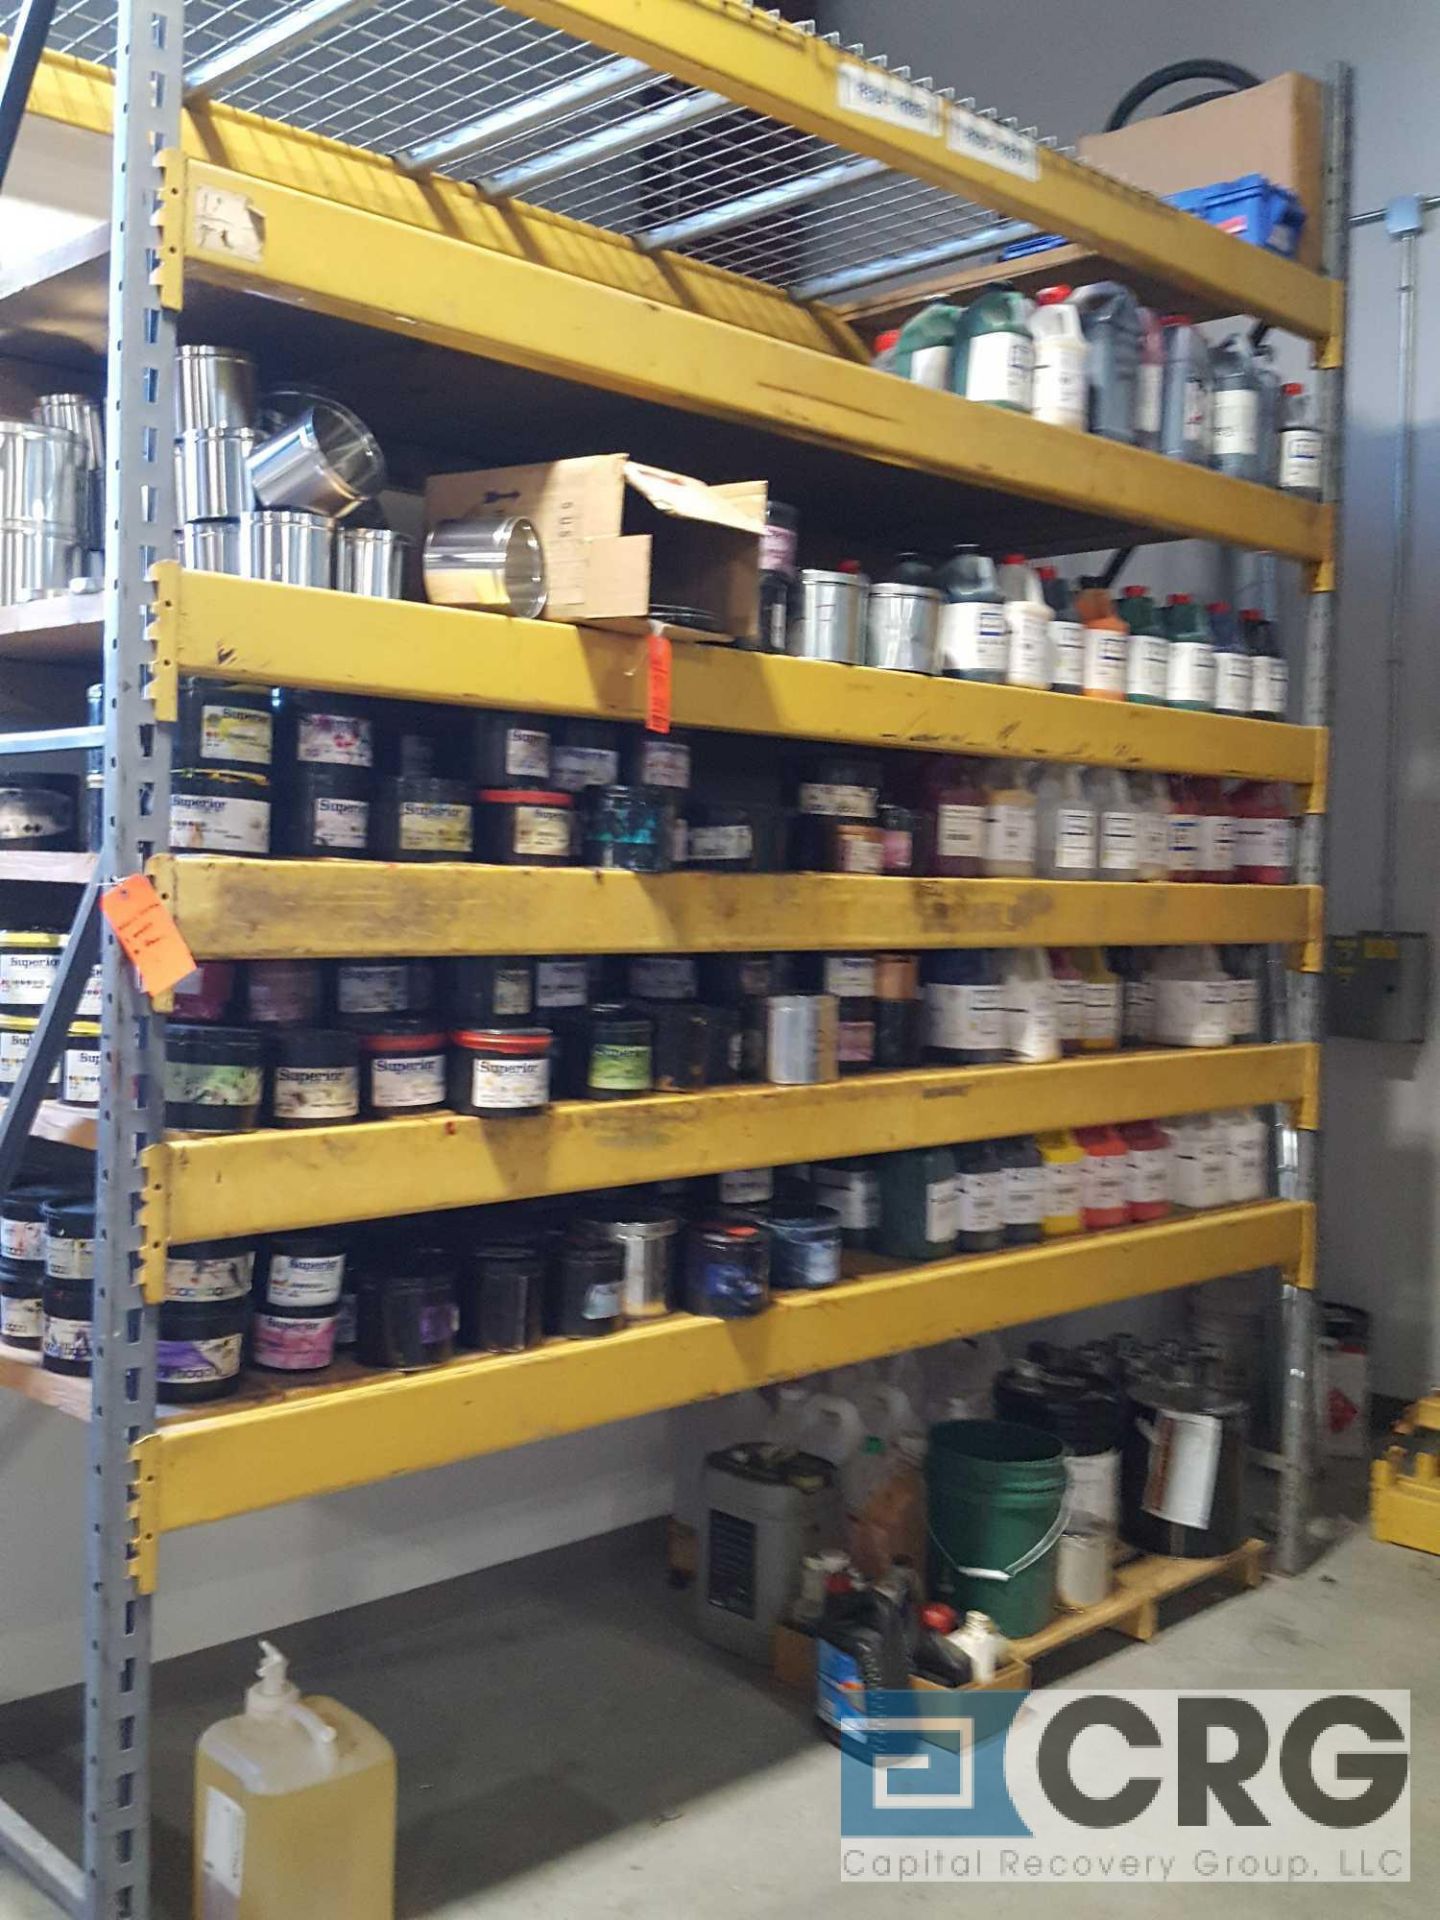 Lot of assorted ink and solvents etc. Buyer may abandon undesired cans or bottles. Contents of